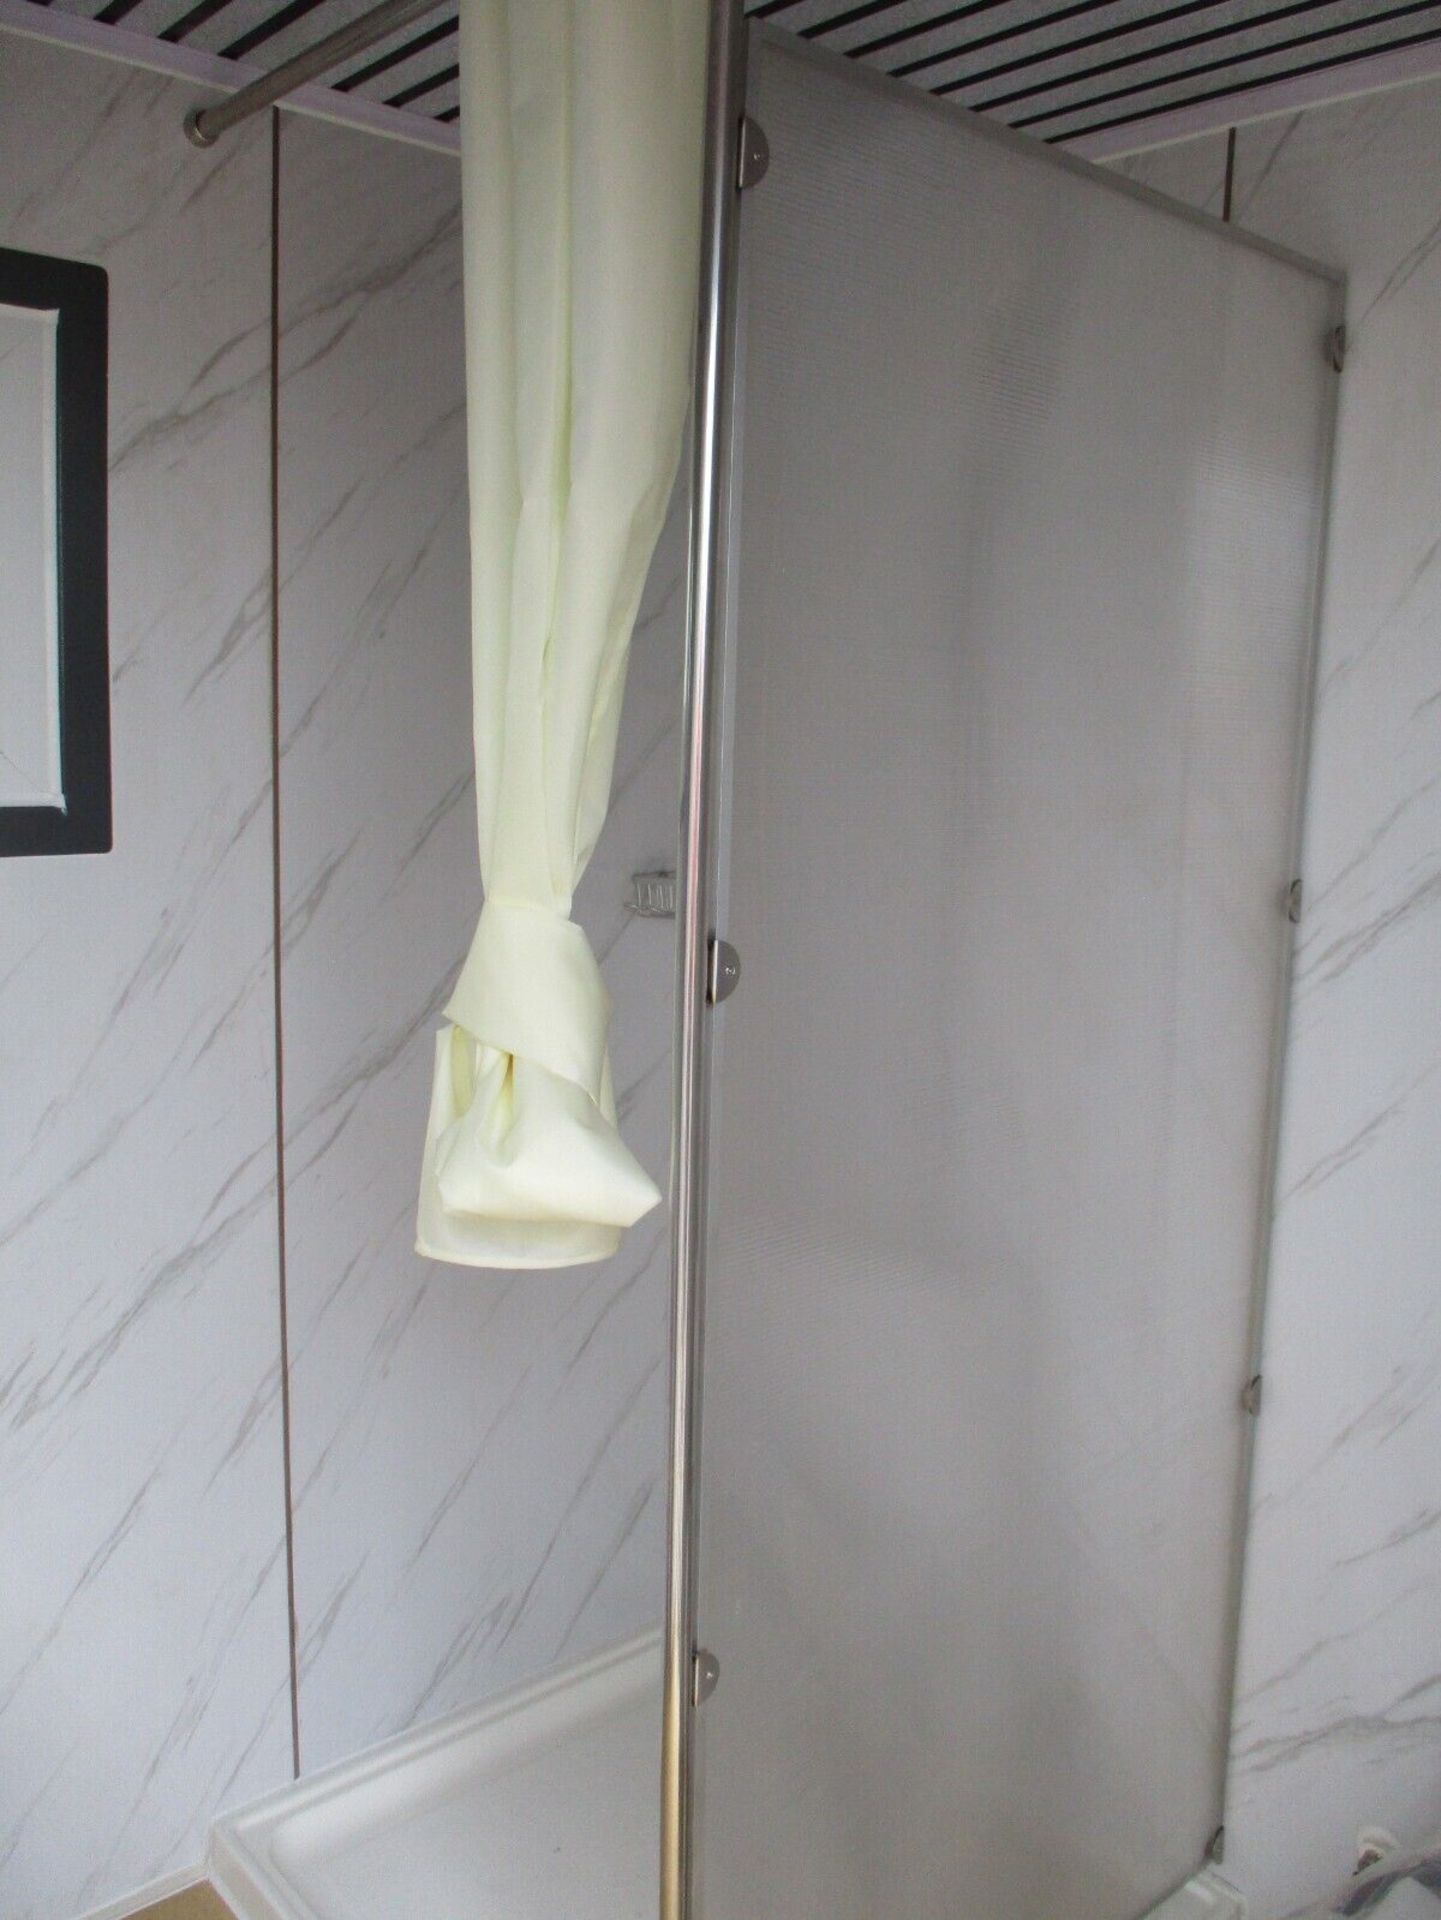 UNUSED 2.15M X 1.9M SHOWER TOILET BLOCK SHIPPING CONTAINER - Image 7 of 9